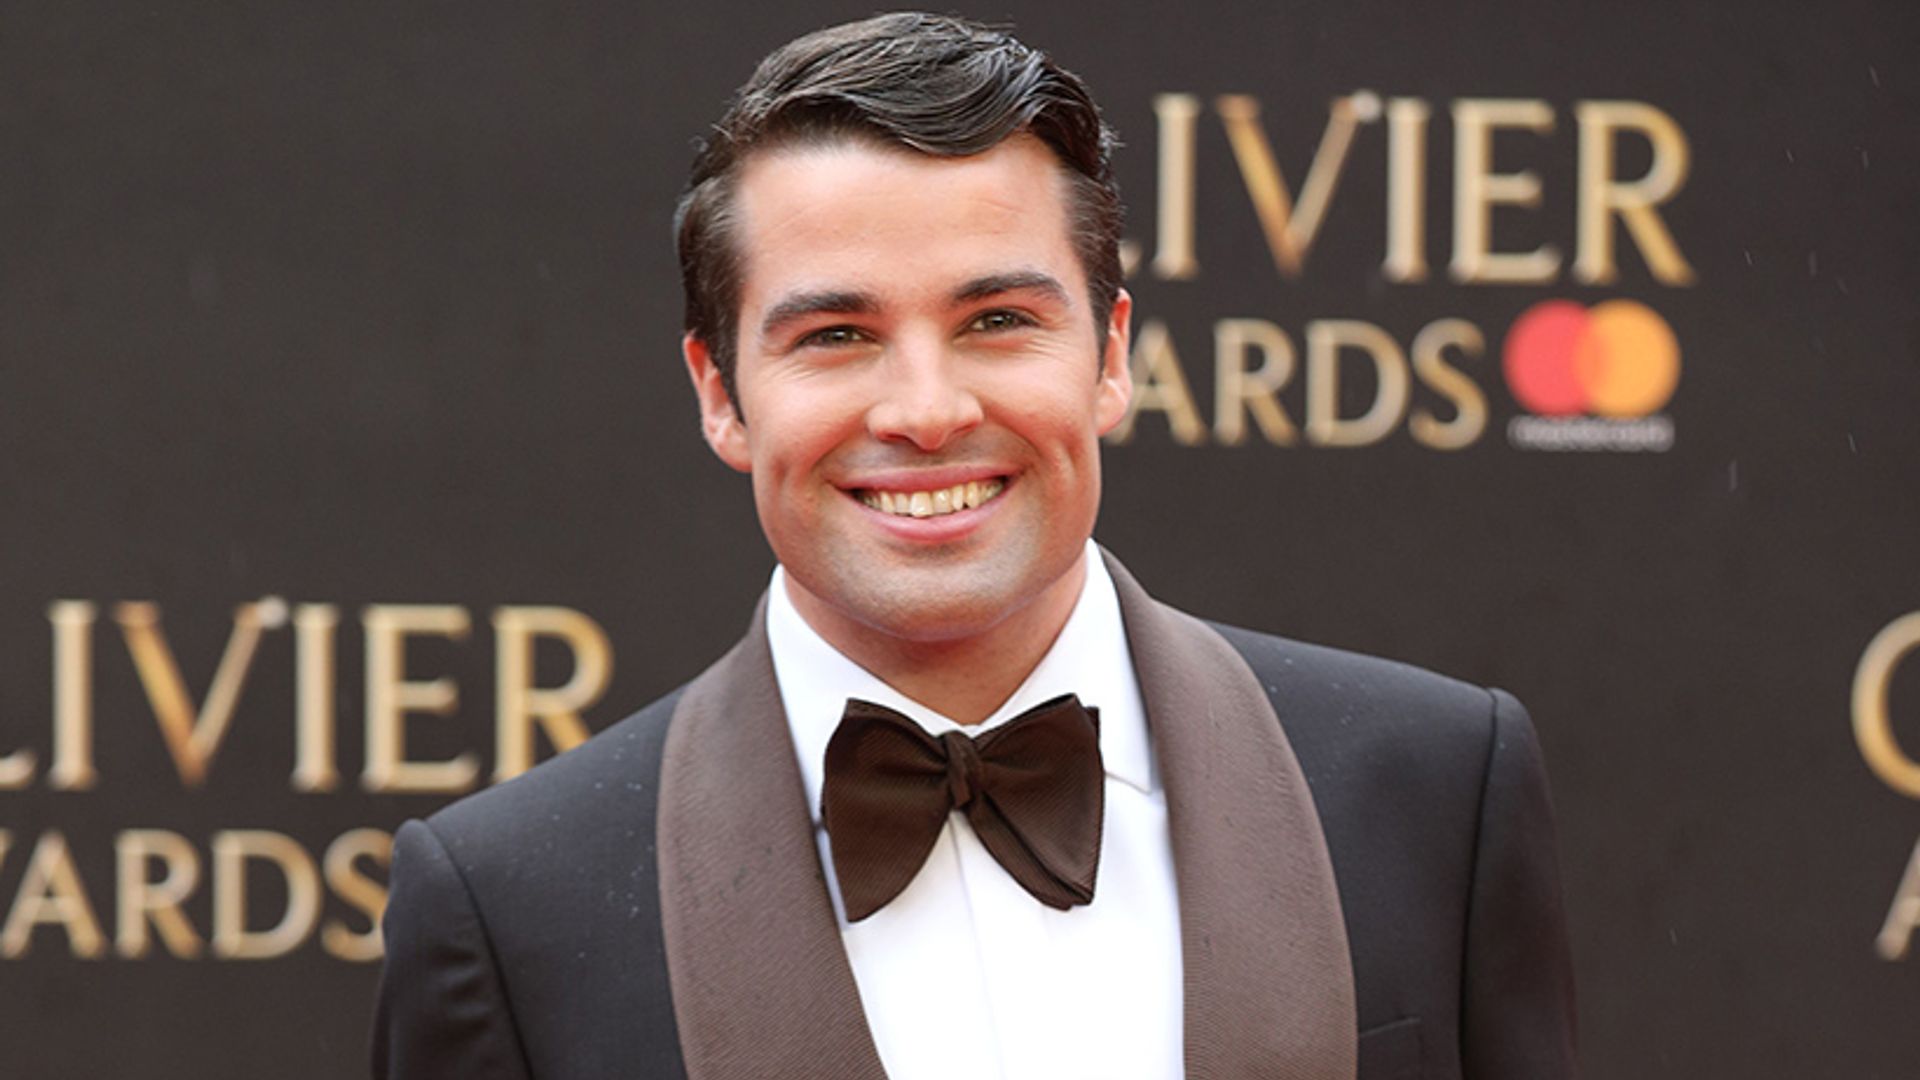 Joe McElderry forced to cancel concert at the last-minute following death threat